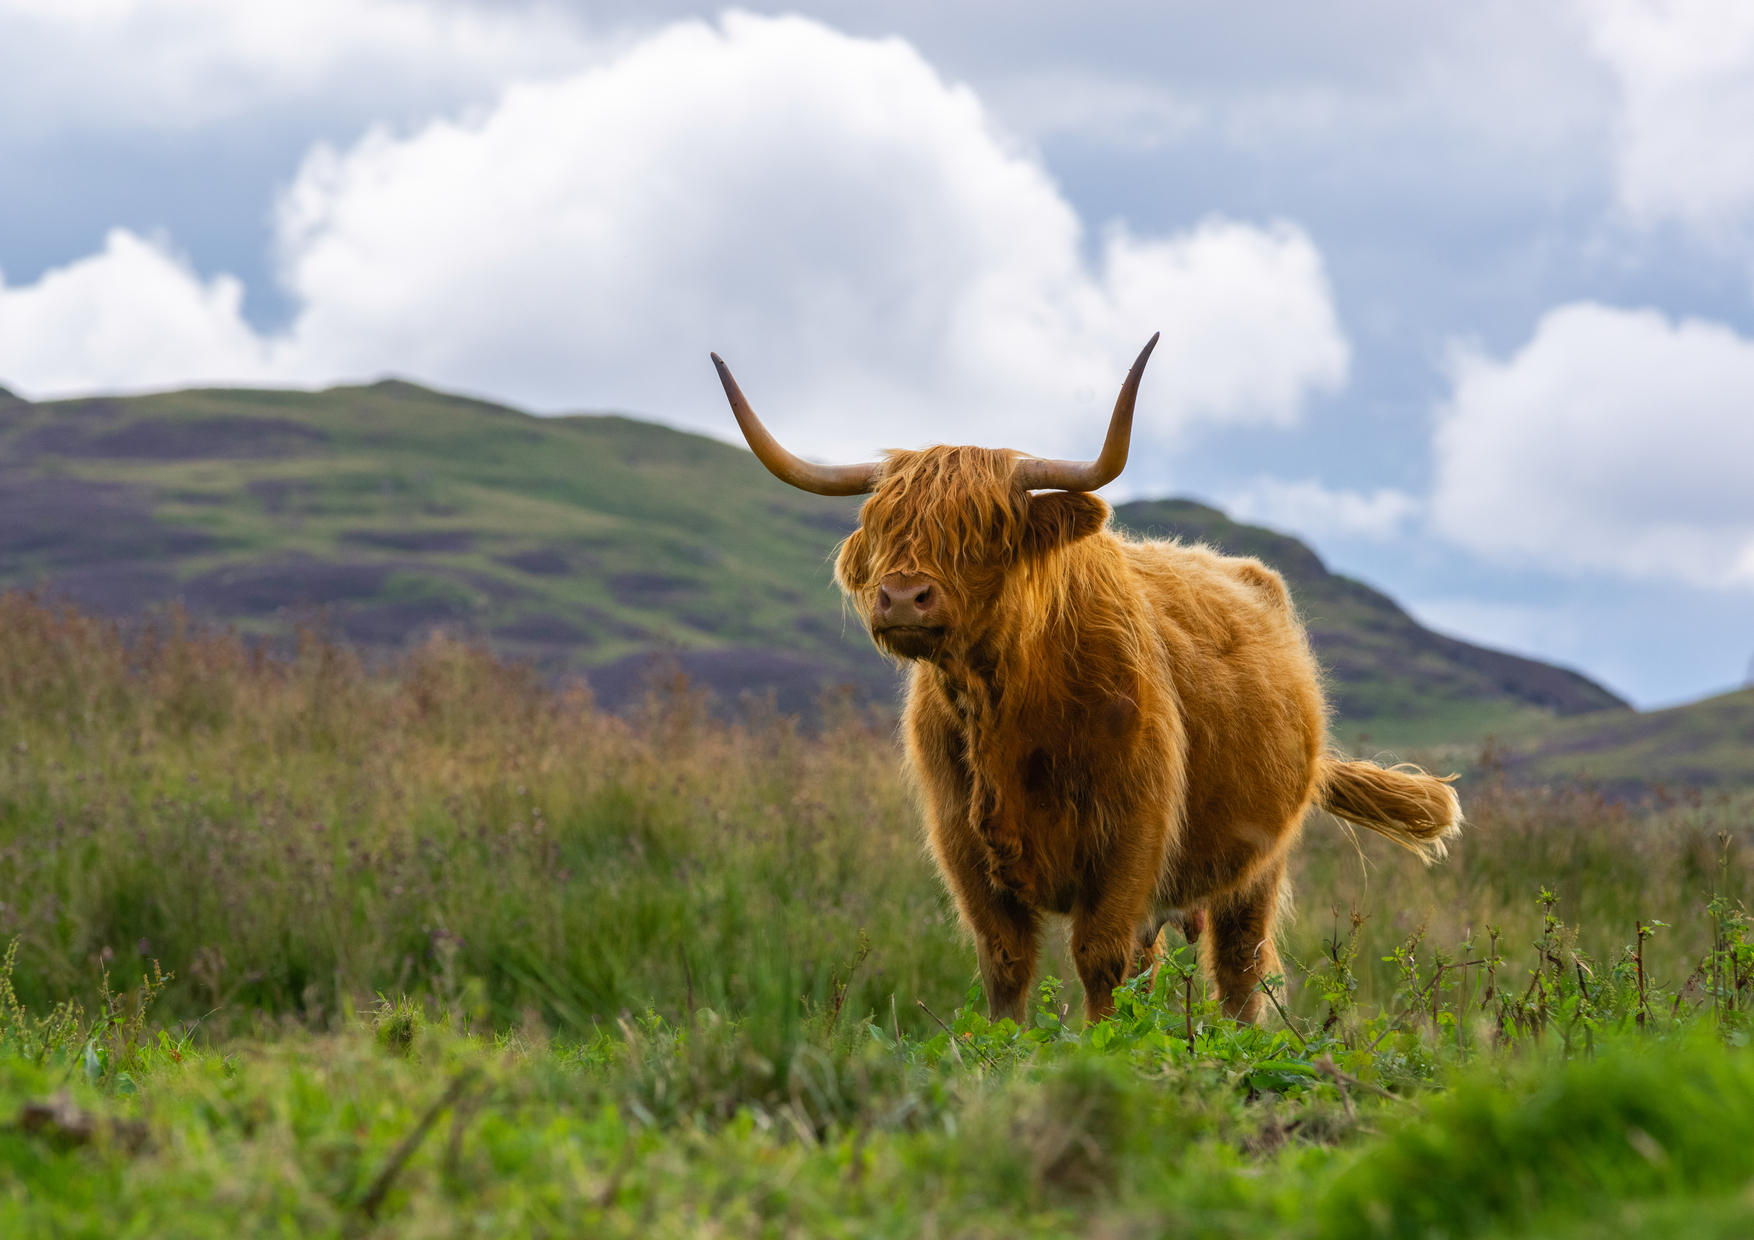 Affectionately known as “<a href="https://www.visitscotland.com/blog/holiday-ideas/great-places-to-see-highland-cows-in-scotland/" rel="noreferrer noopener">hairy coos</a>,” these beautiful, shaggy cows are easy to spot when travelling the roads of their native region, the Highlands. Animal lovers with be happy to know that many farms will let you feed and pet them.